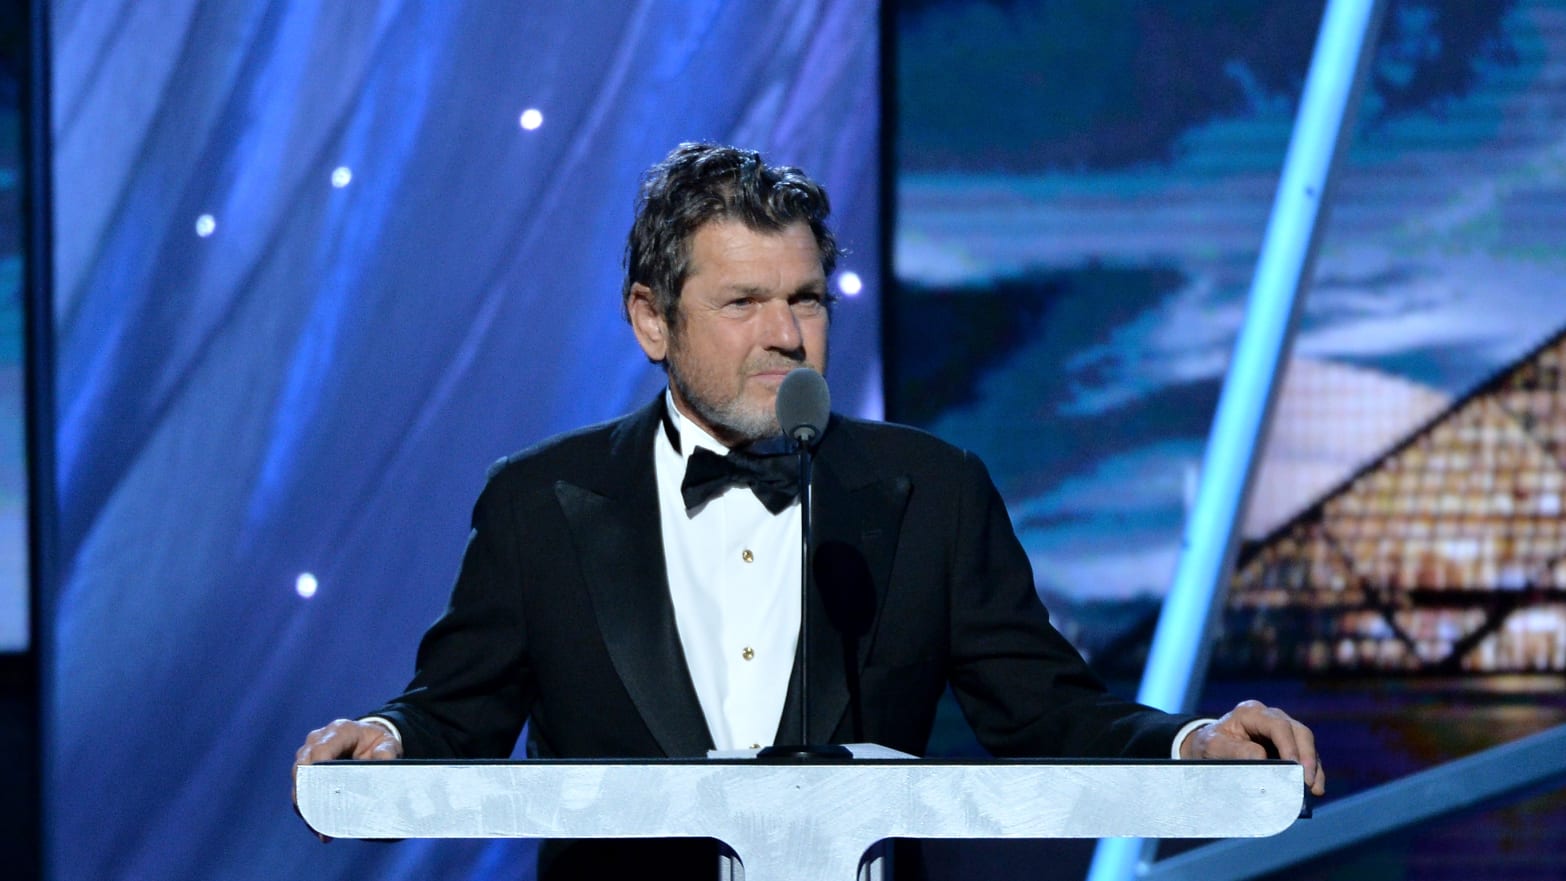 Rolling Stone Throws Its Founder Jann Wenner Under the Bus